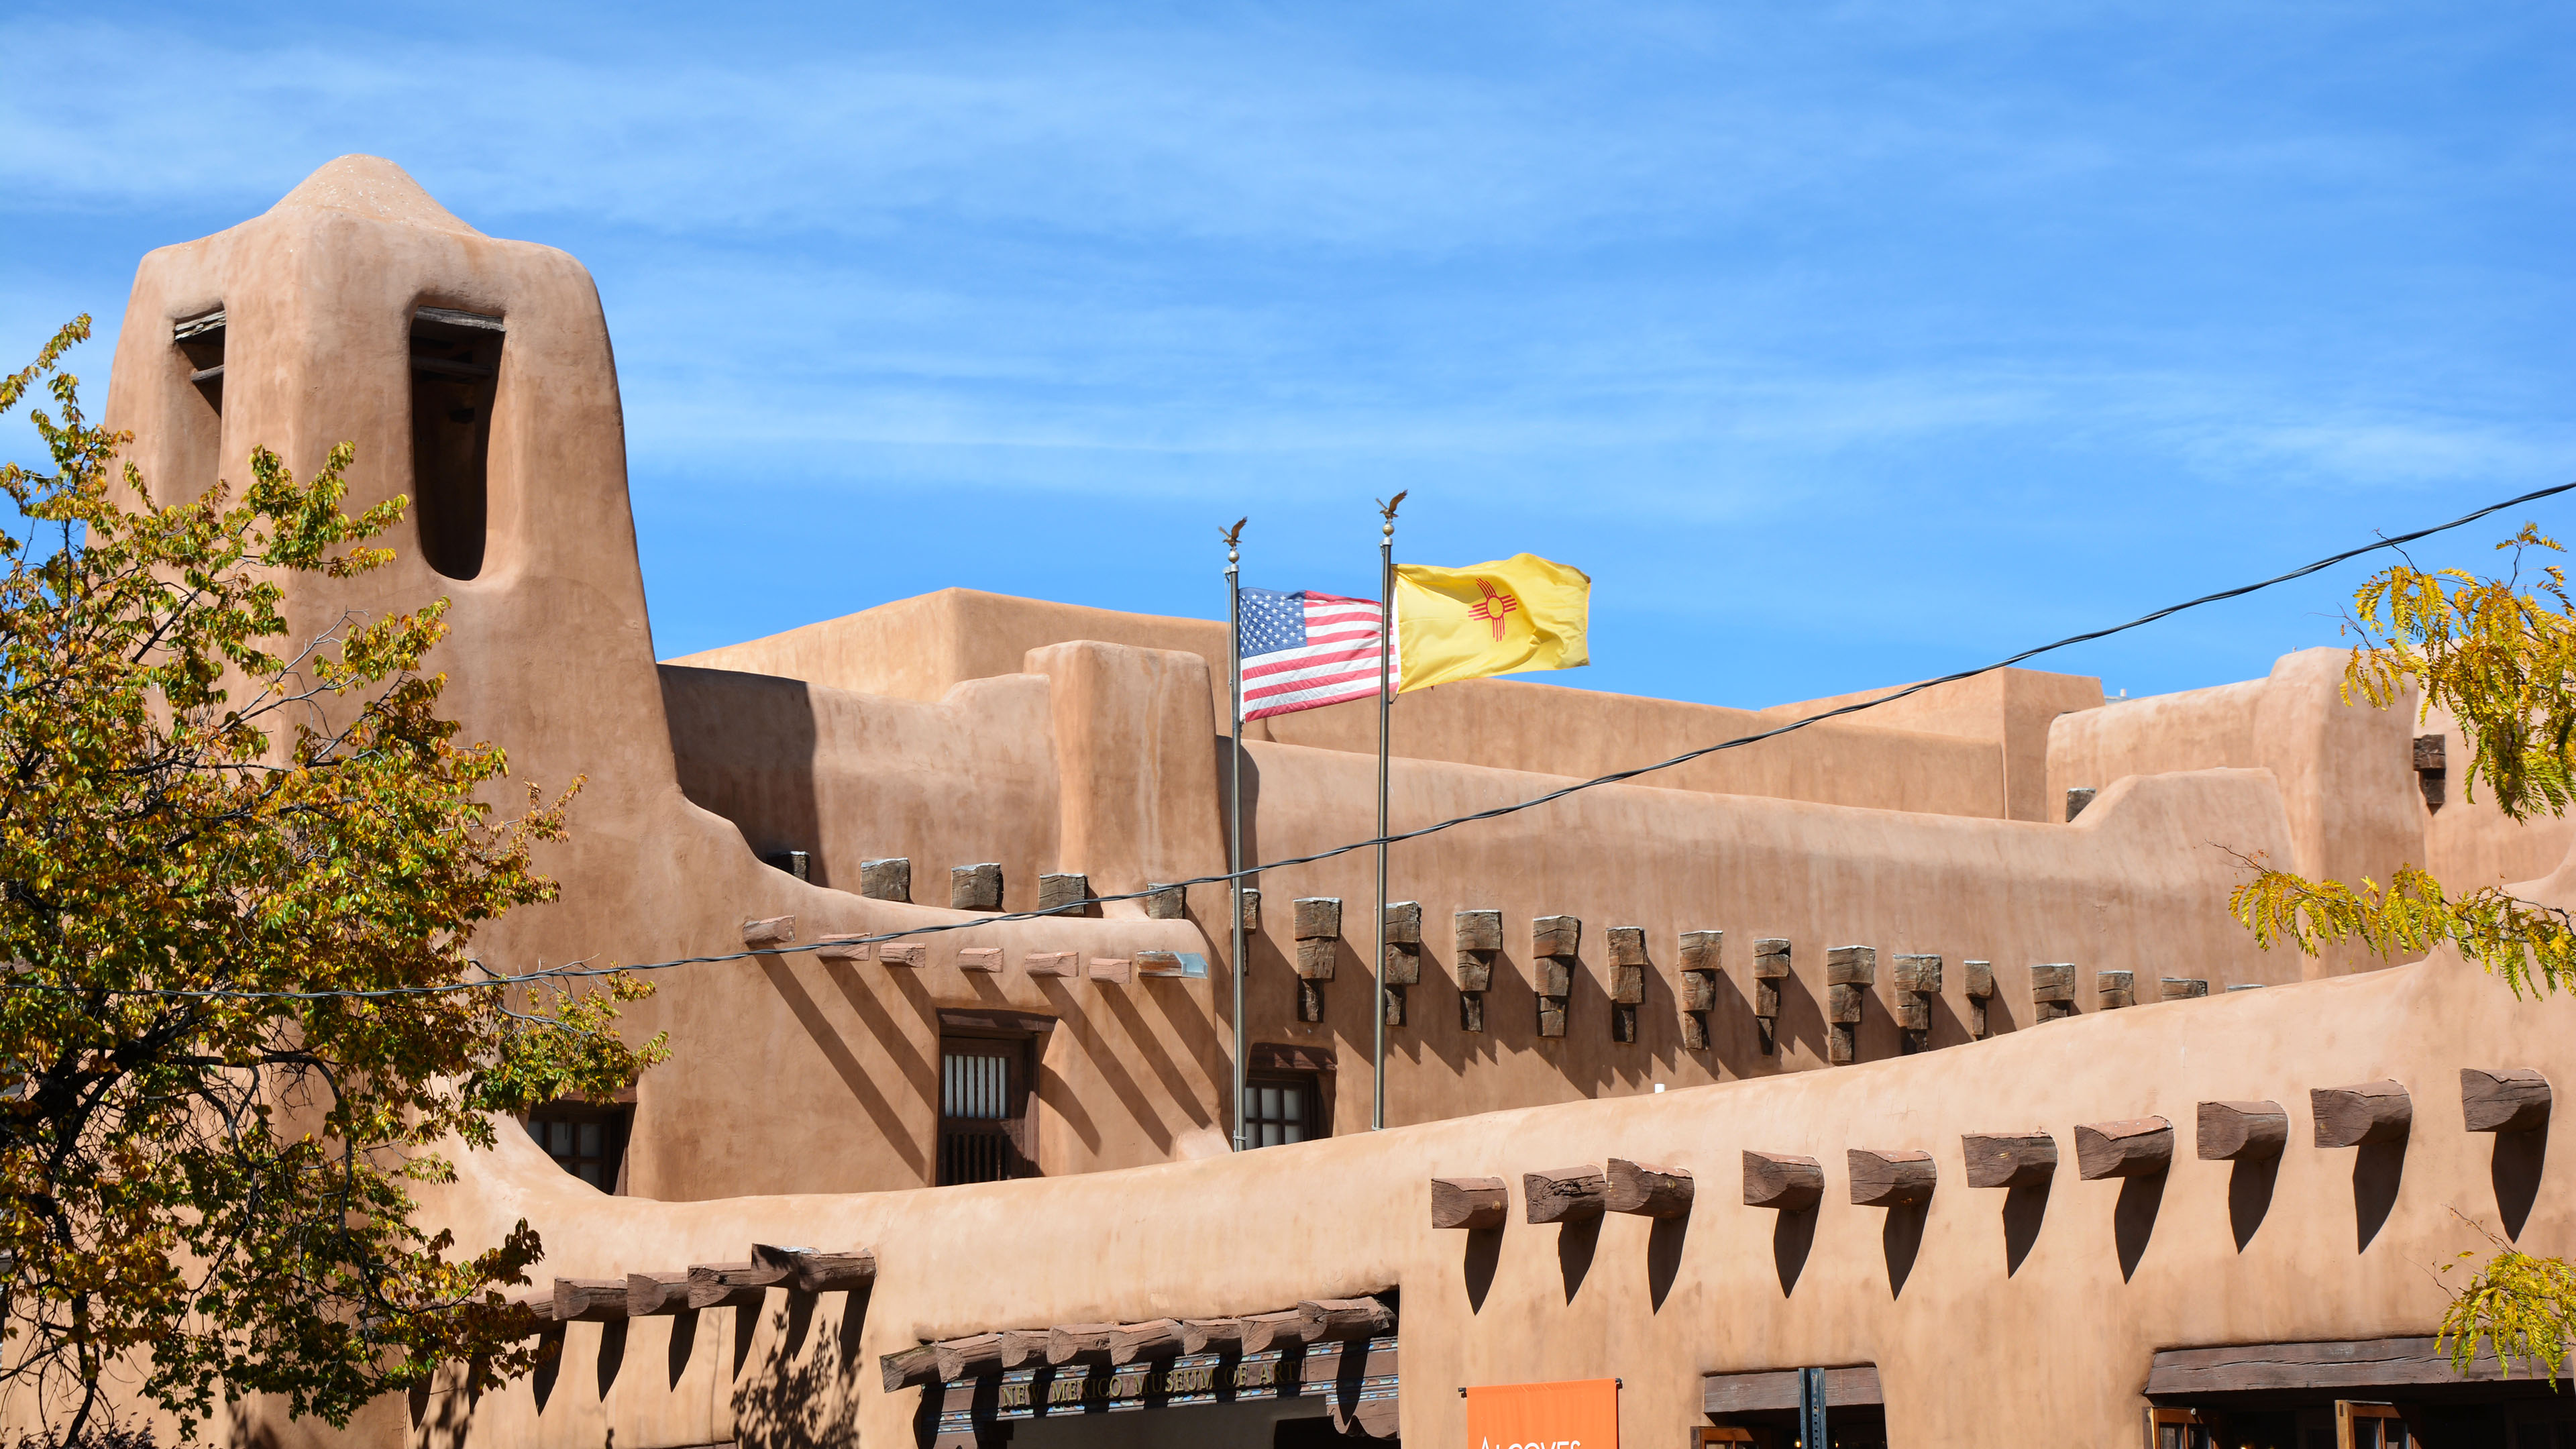 Adobe Architecture at New Mexico Museum of Art